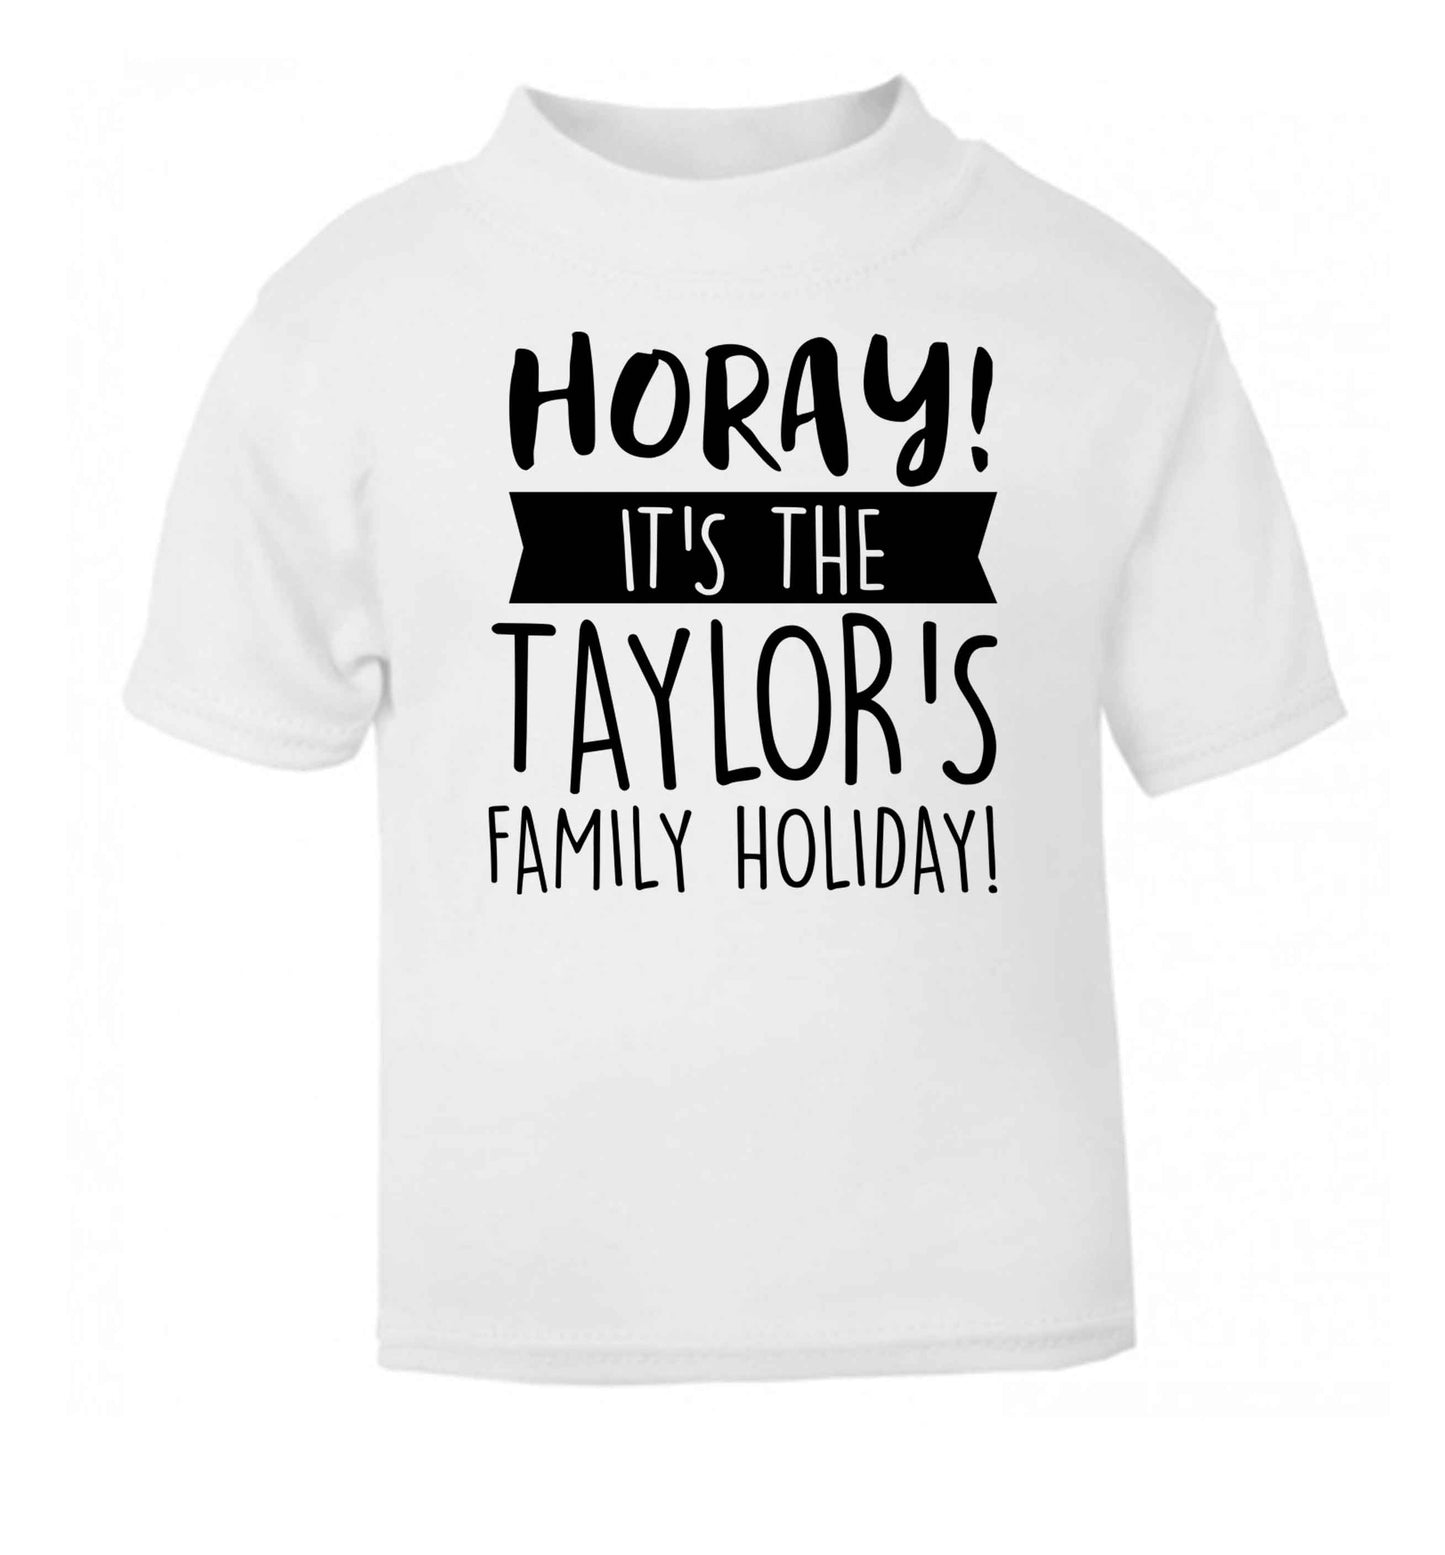 Horay it's the Taylor's family holiday! personalised item white Baby Toddler Tshirt 2 Years